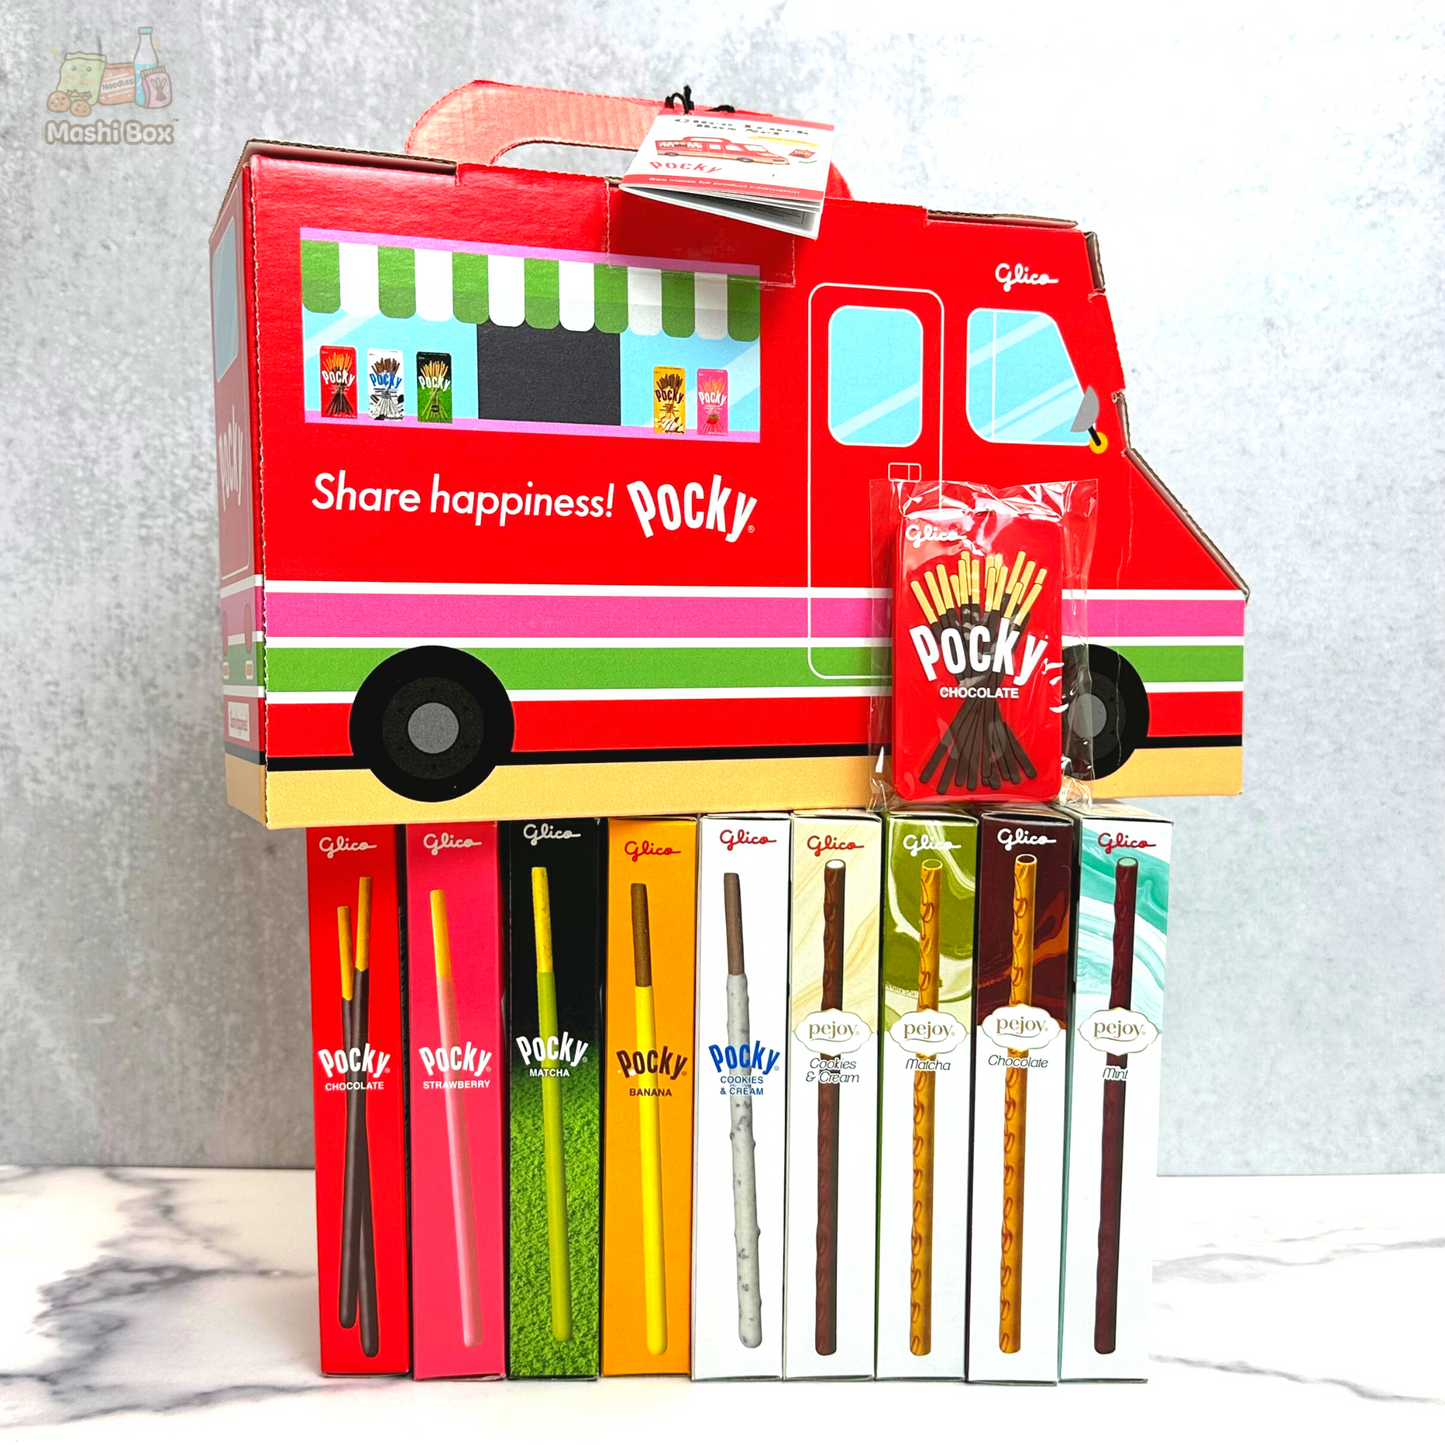 Glico Truck Box Gift Set with Limited Edition Pocky Keychain